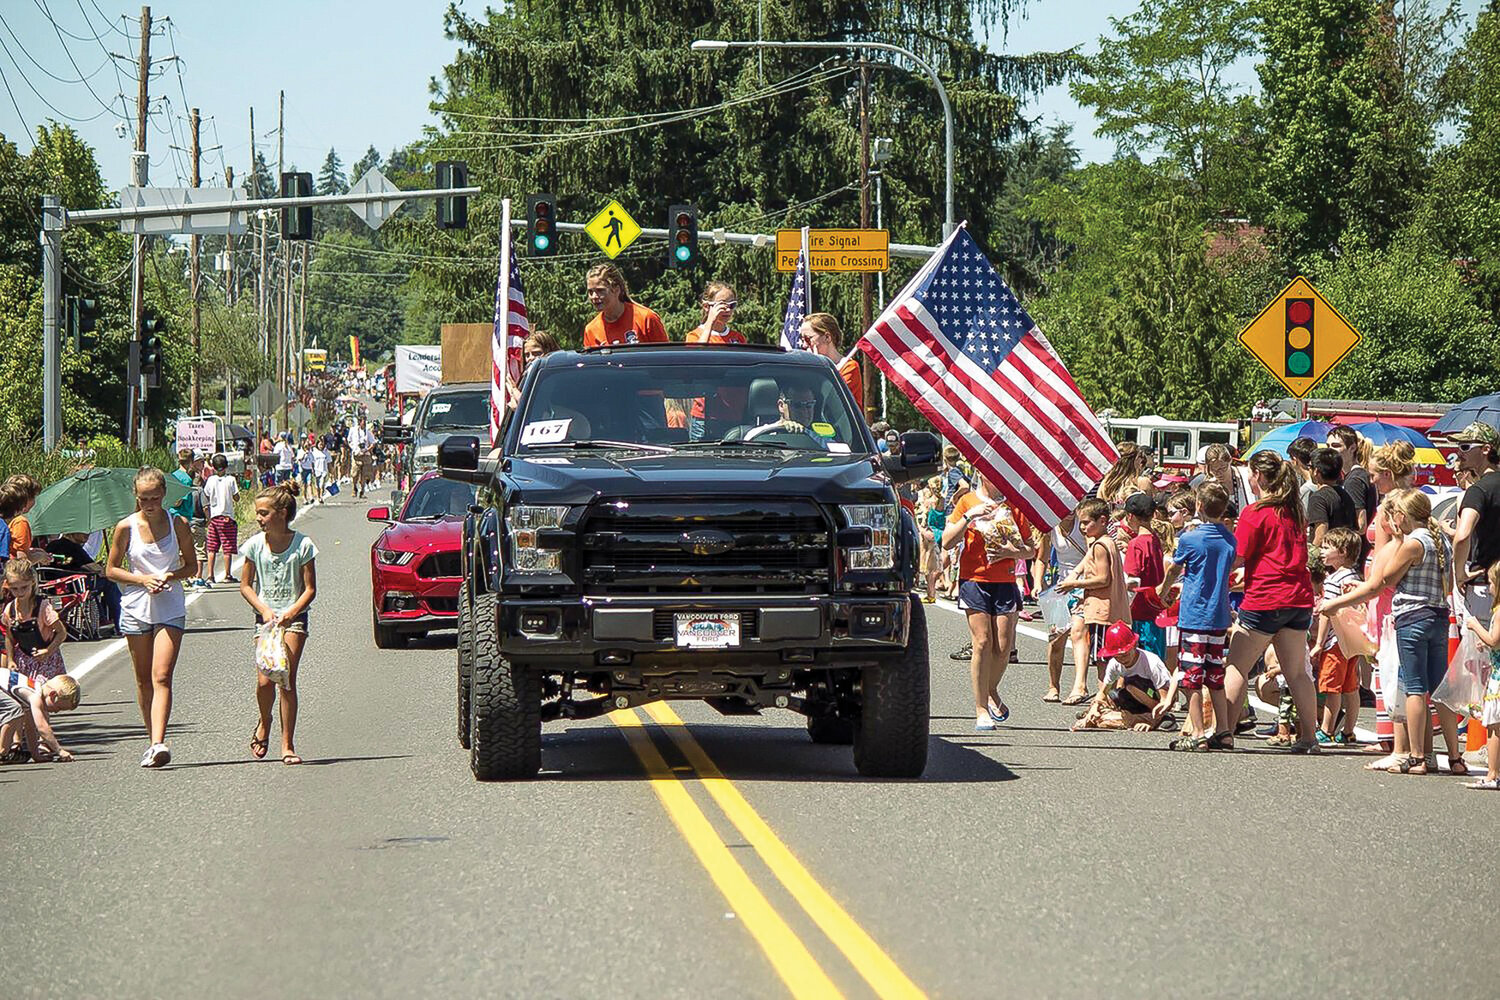 Participants in a previous Hockinson Fun Days Parade hand out candy to kids. This year’s event will take place at noon on Saturday, June 3.